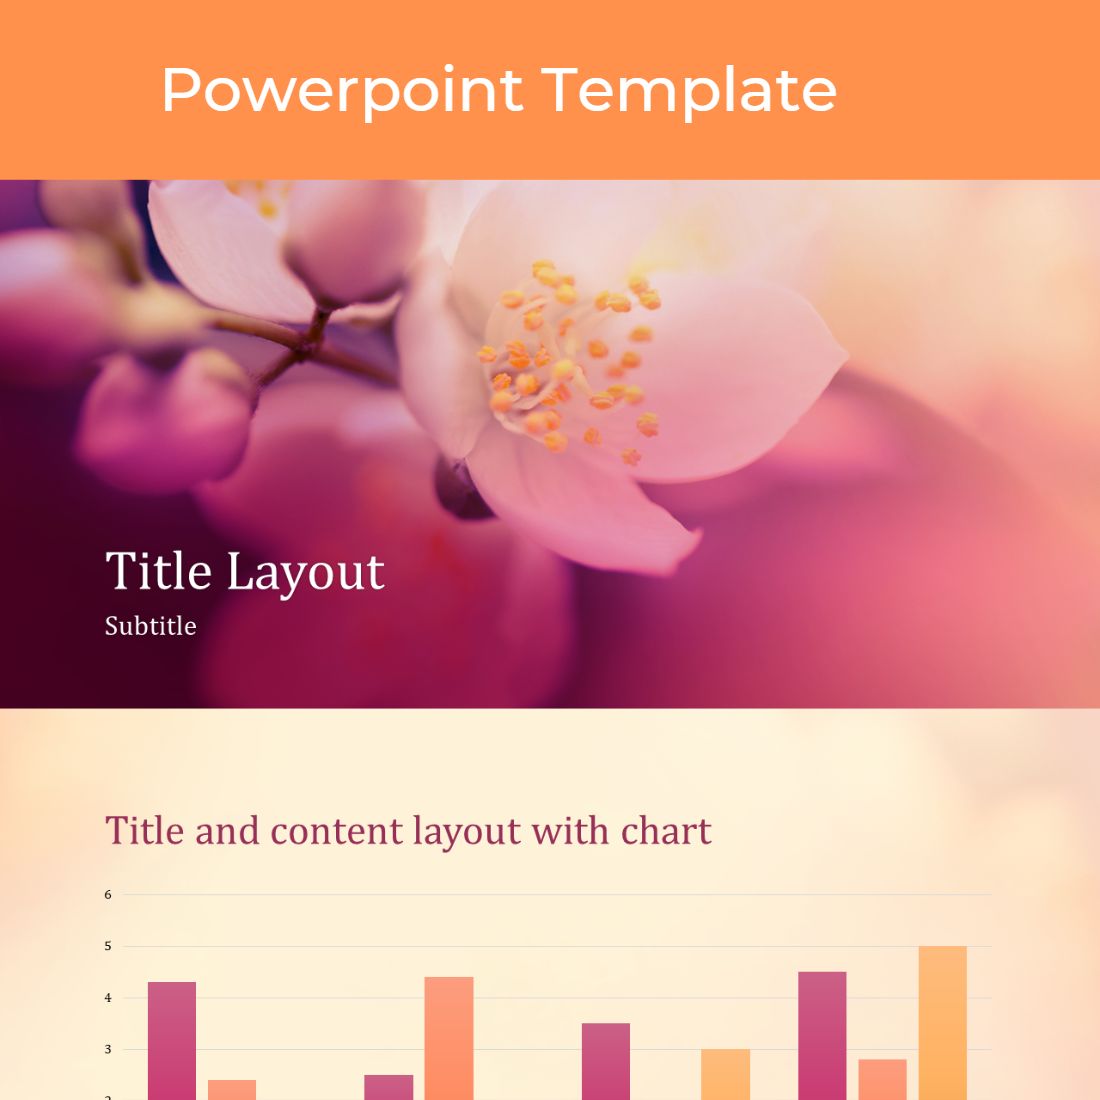 Cherry Blossom Powerpoint Presentation Template cover image.